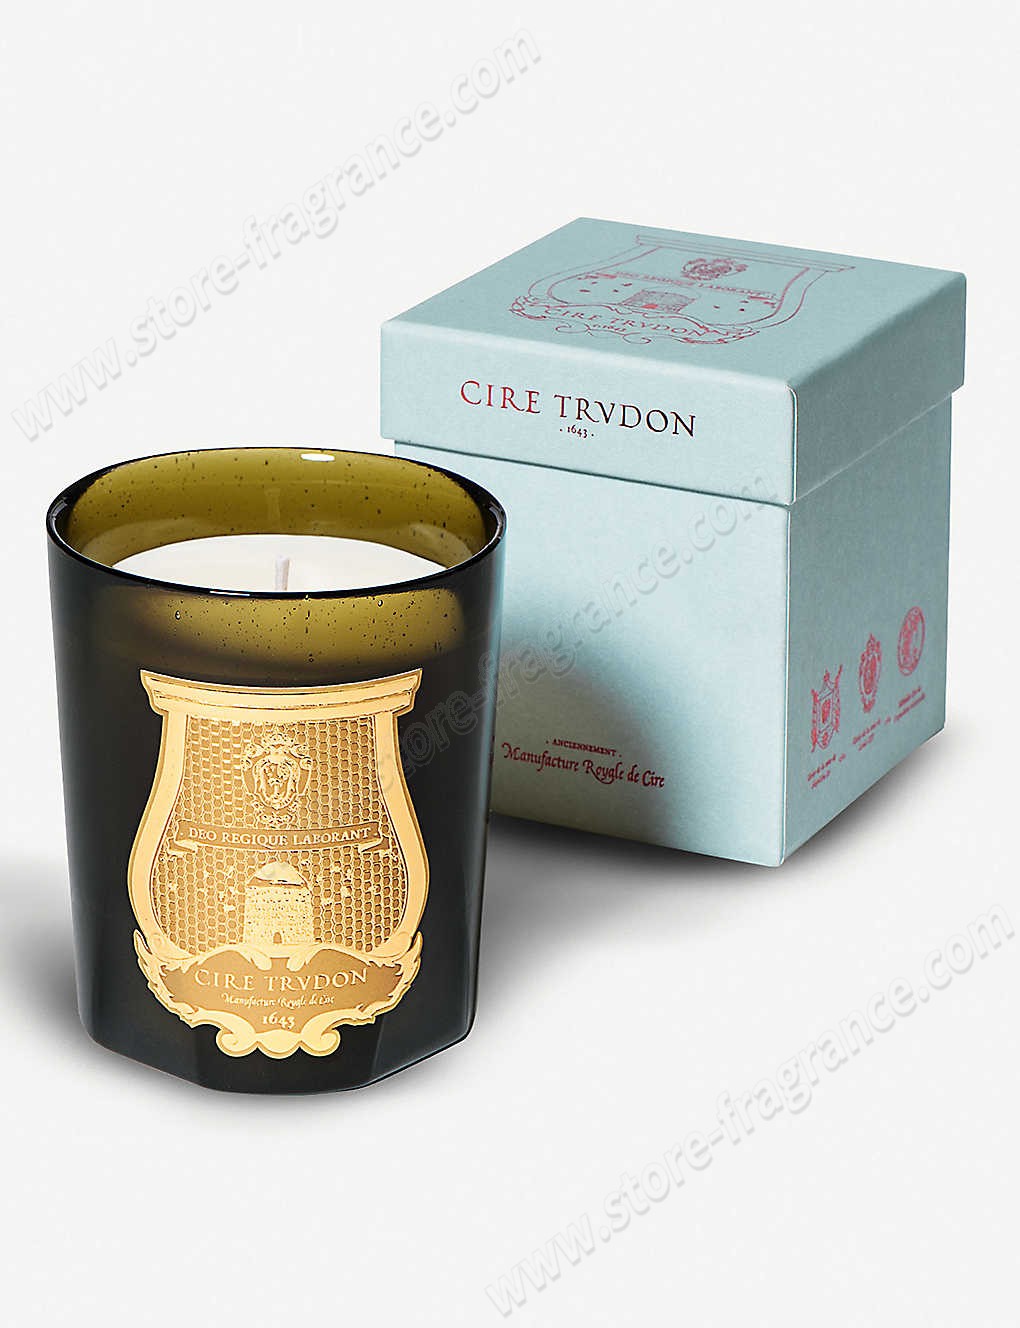 CIRE TRUDON/Abd El Khader scented candle 270g ✿ Discount Store - -0